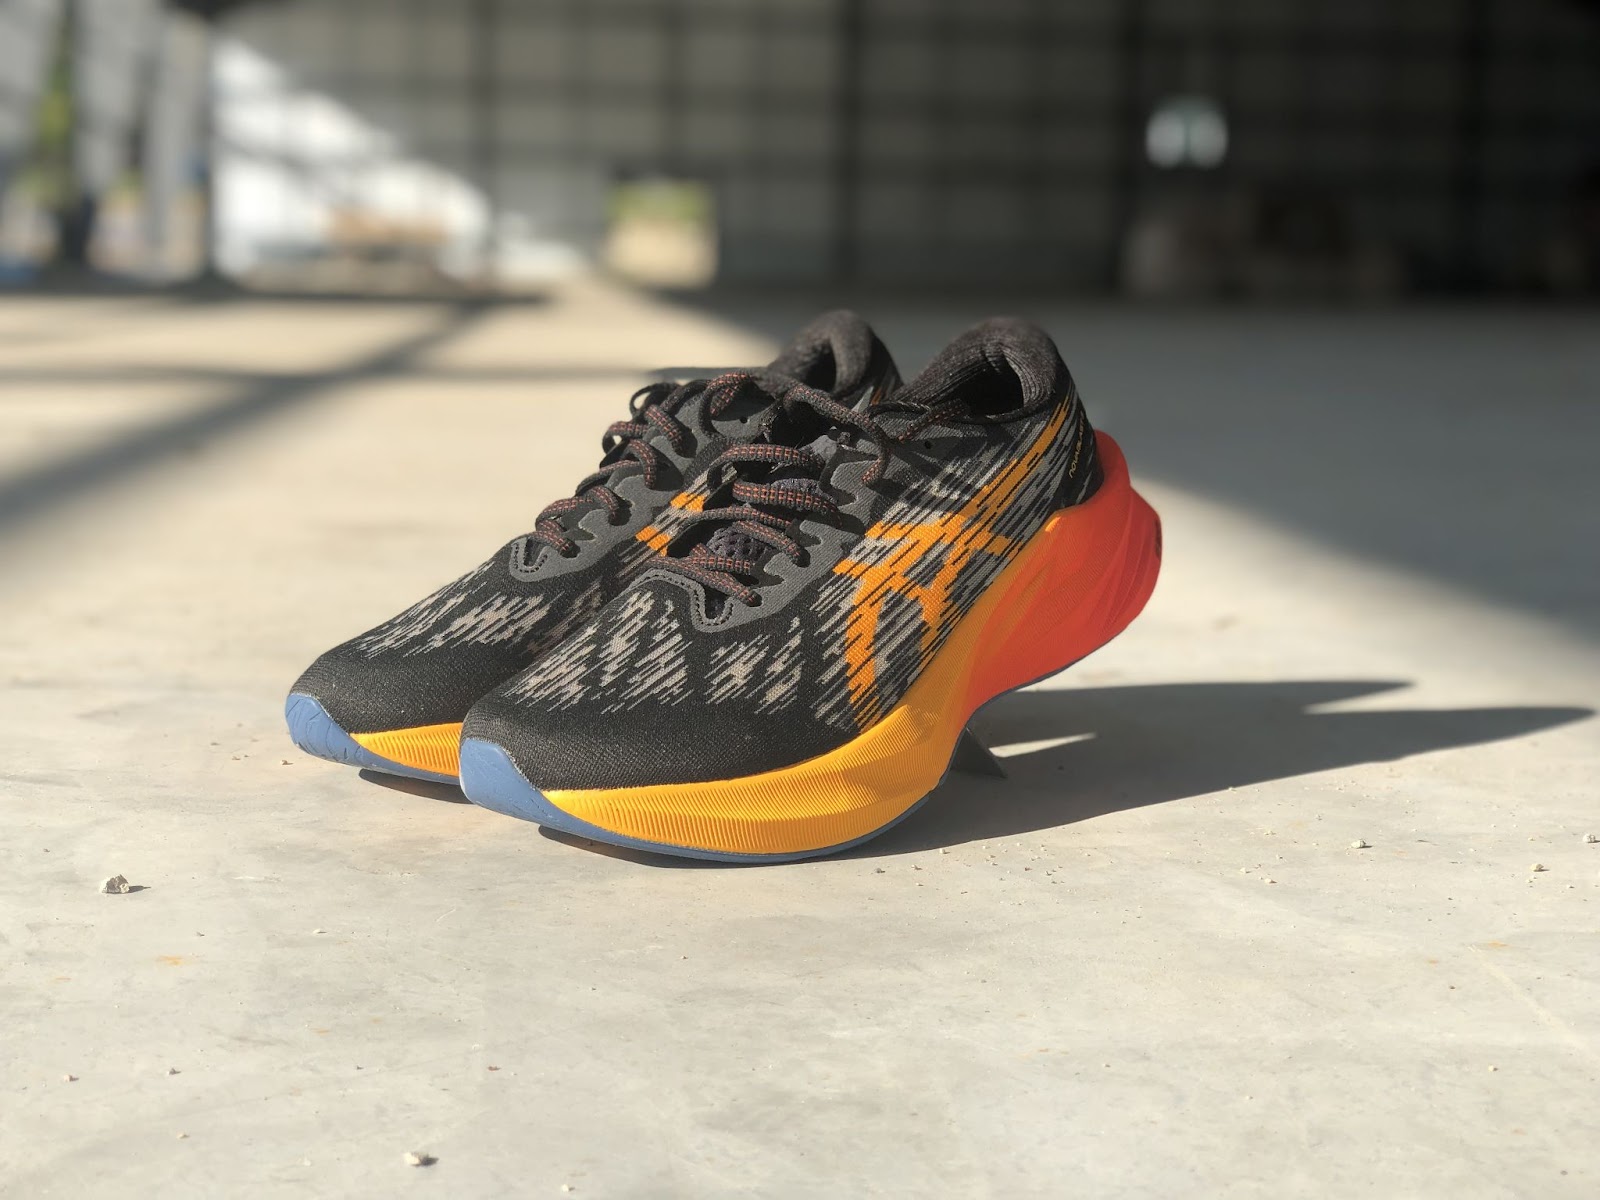 Asics Novablast 3 Review: Watch the Throne - Believe in the Run